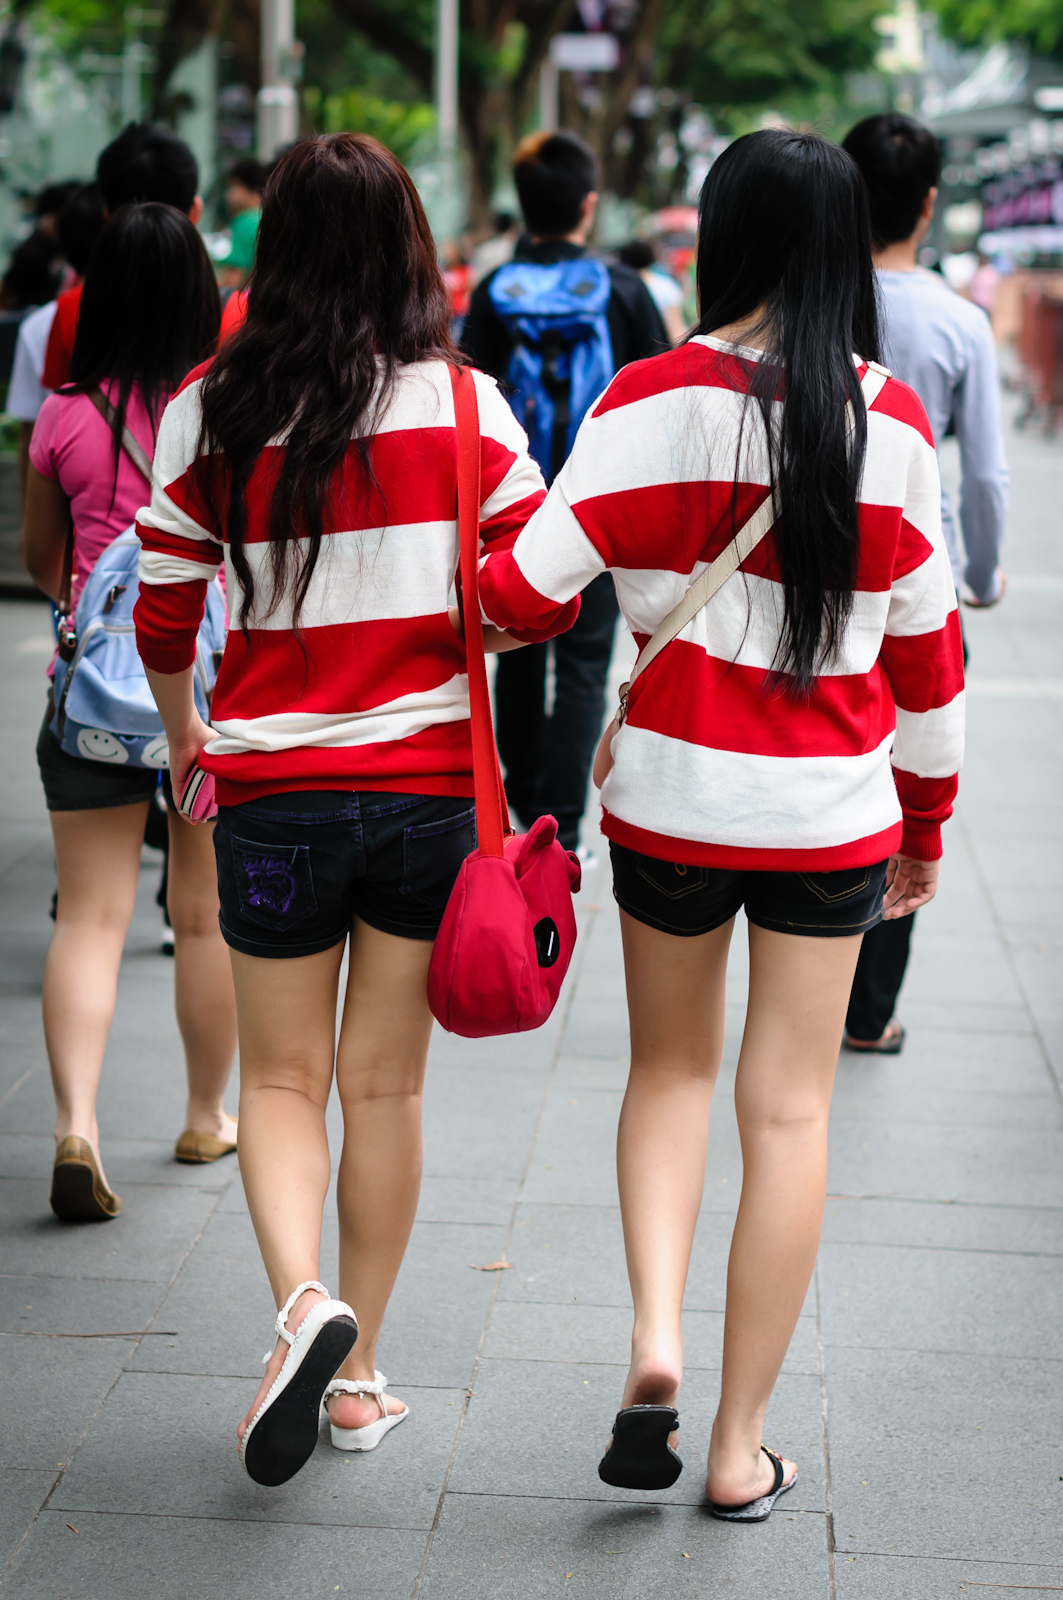 Street photography - two girls in red and white stripes holding hands